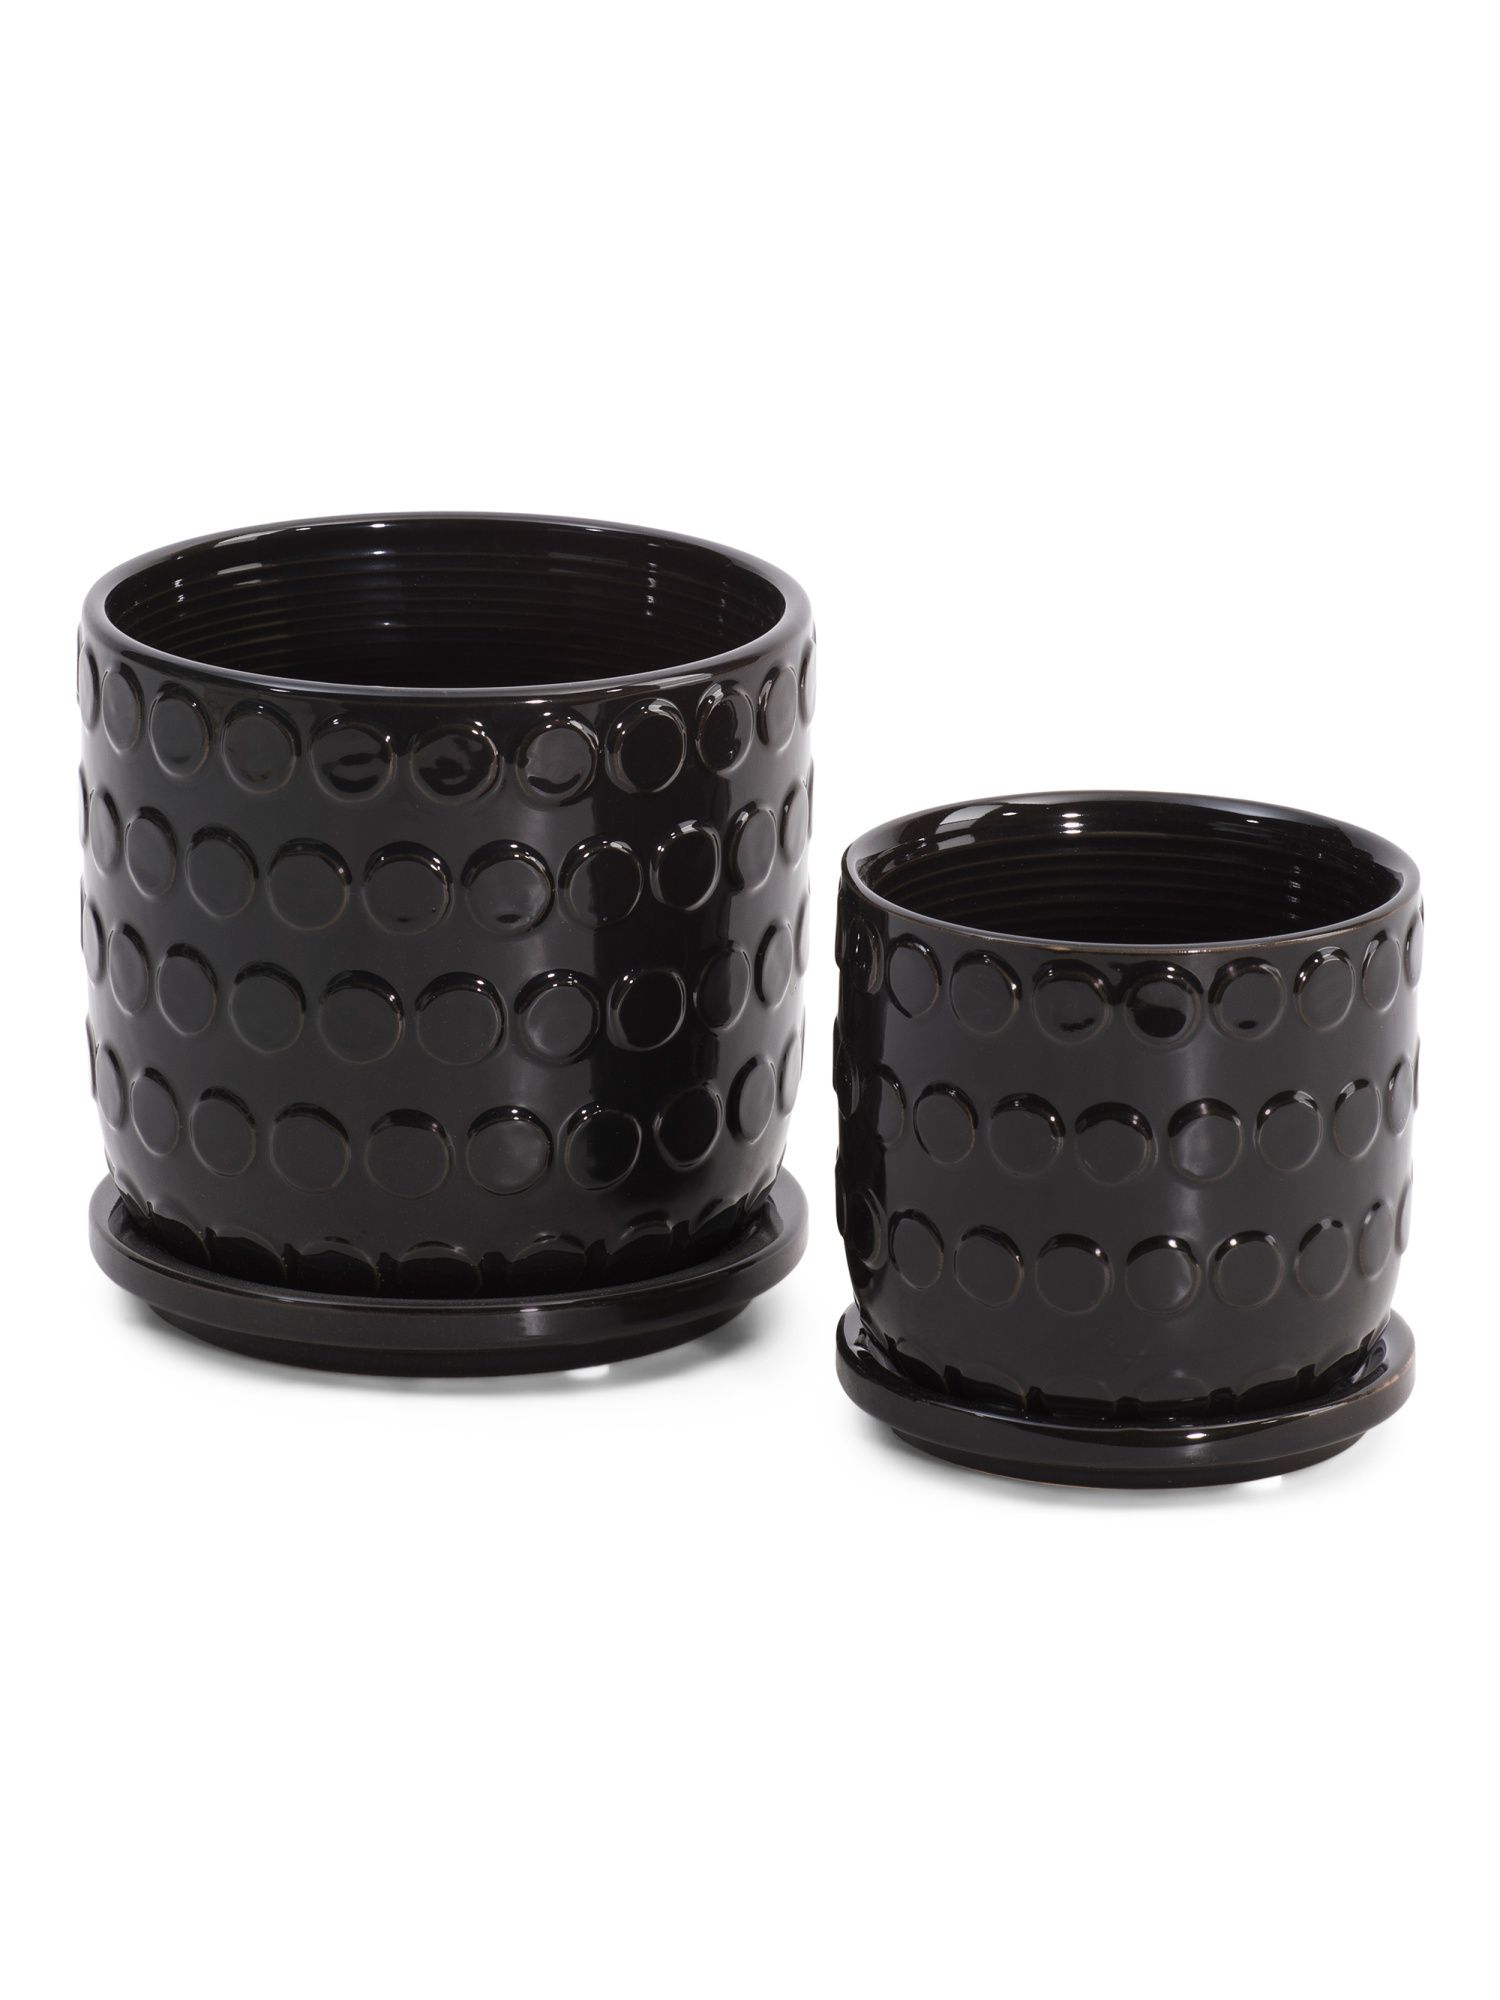 Set Of 2 Bubble Planters With Saucer | TJ Maxx